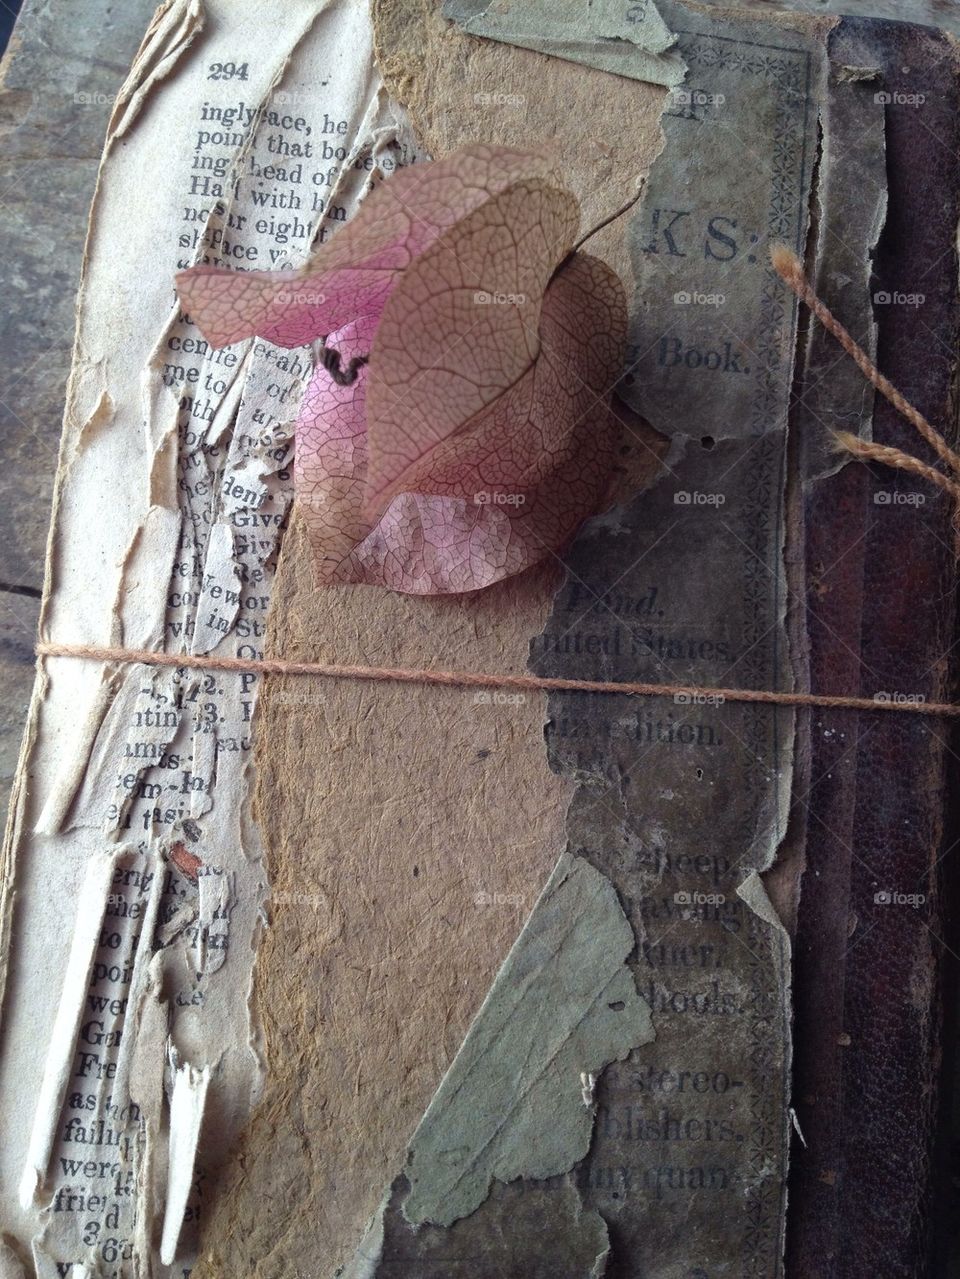 Damaged book with bougainvillea